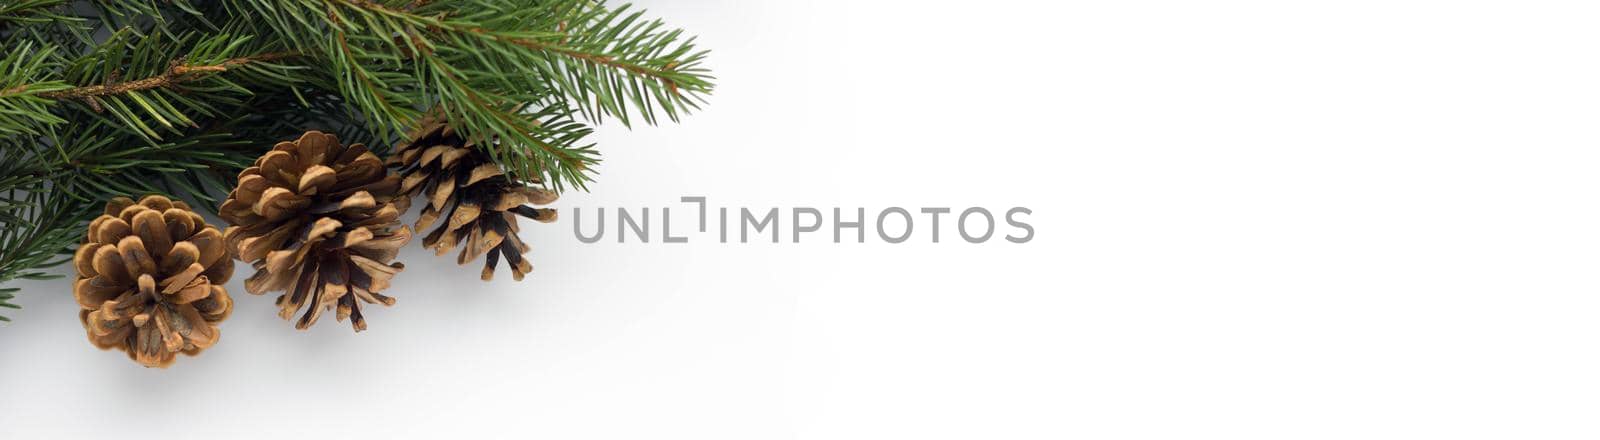 Christmas panorama: fresh pine branches with cones on a white background. View from above. place for your text.